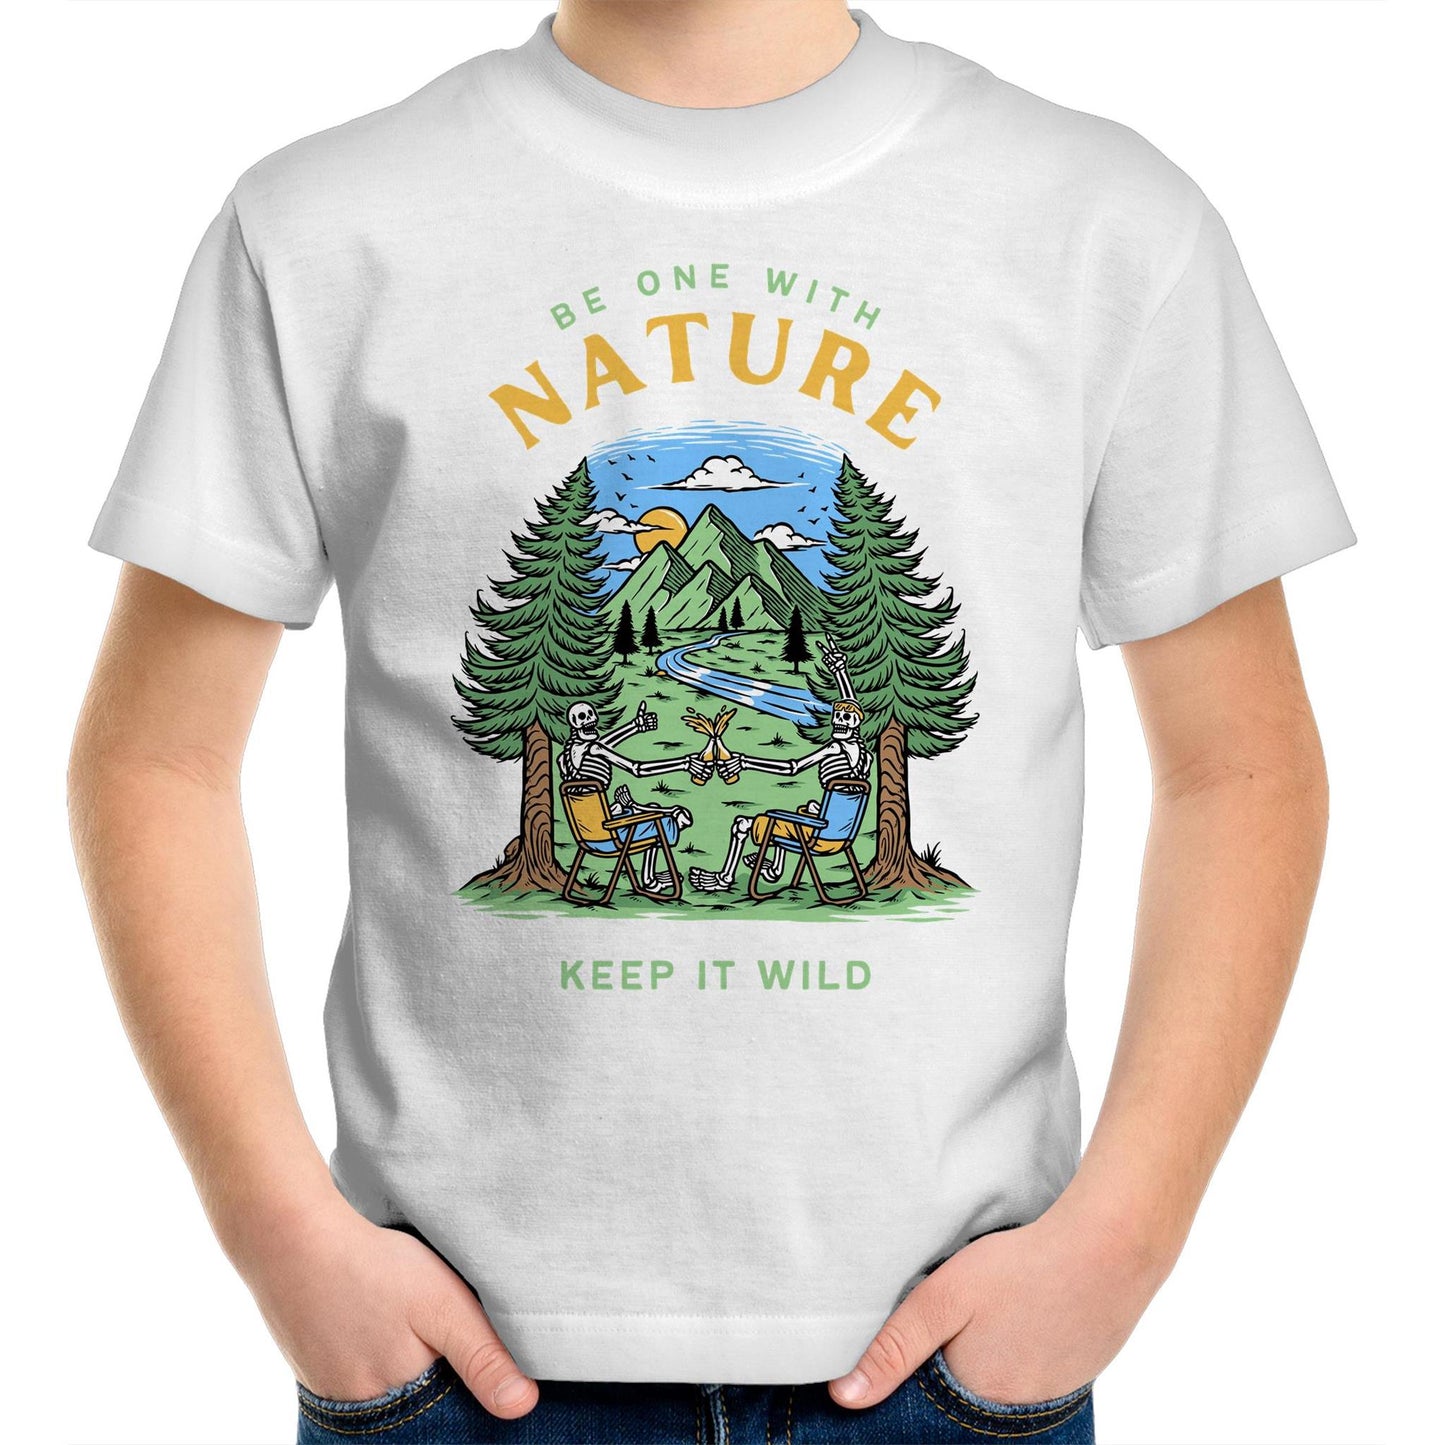 Be One With Nature, Skeleton - Kids Youth T-Shirt White Kids Youth T-shirt Environment Summer